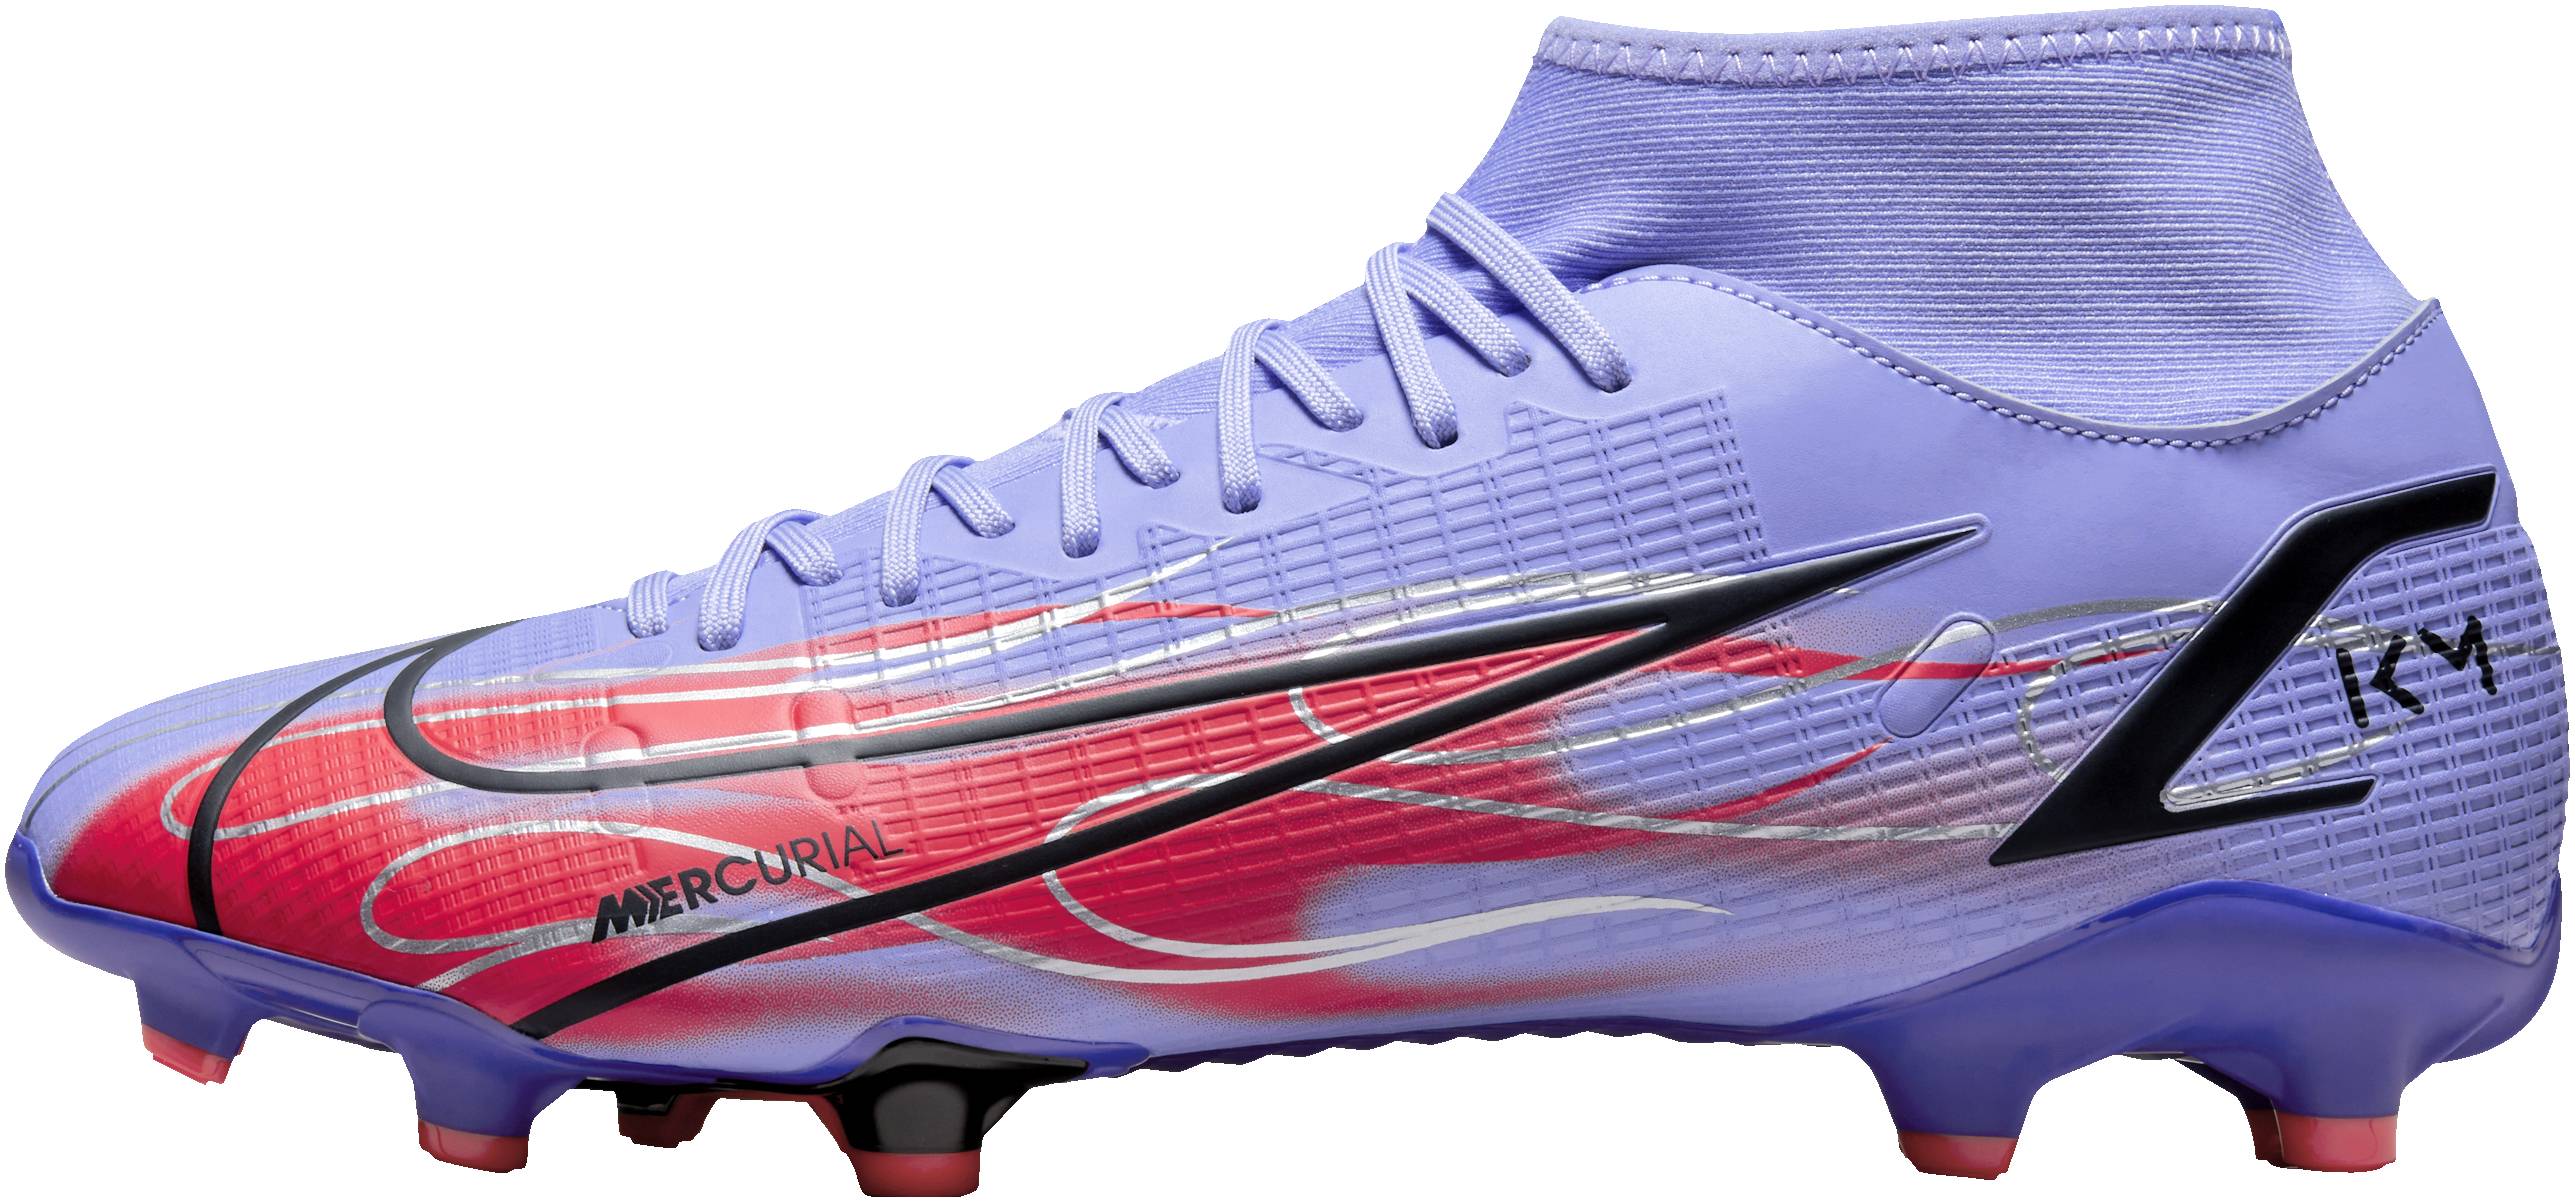 Nike Mercurial Superfly 8 Academy Facts, Deals | RunRepeat